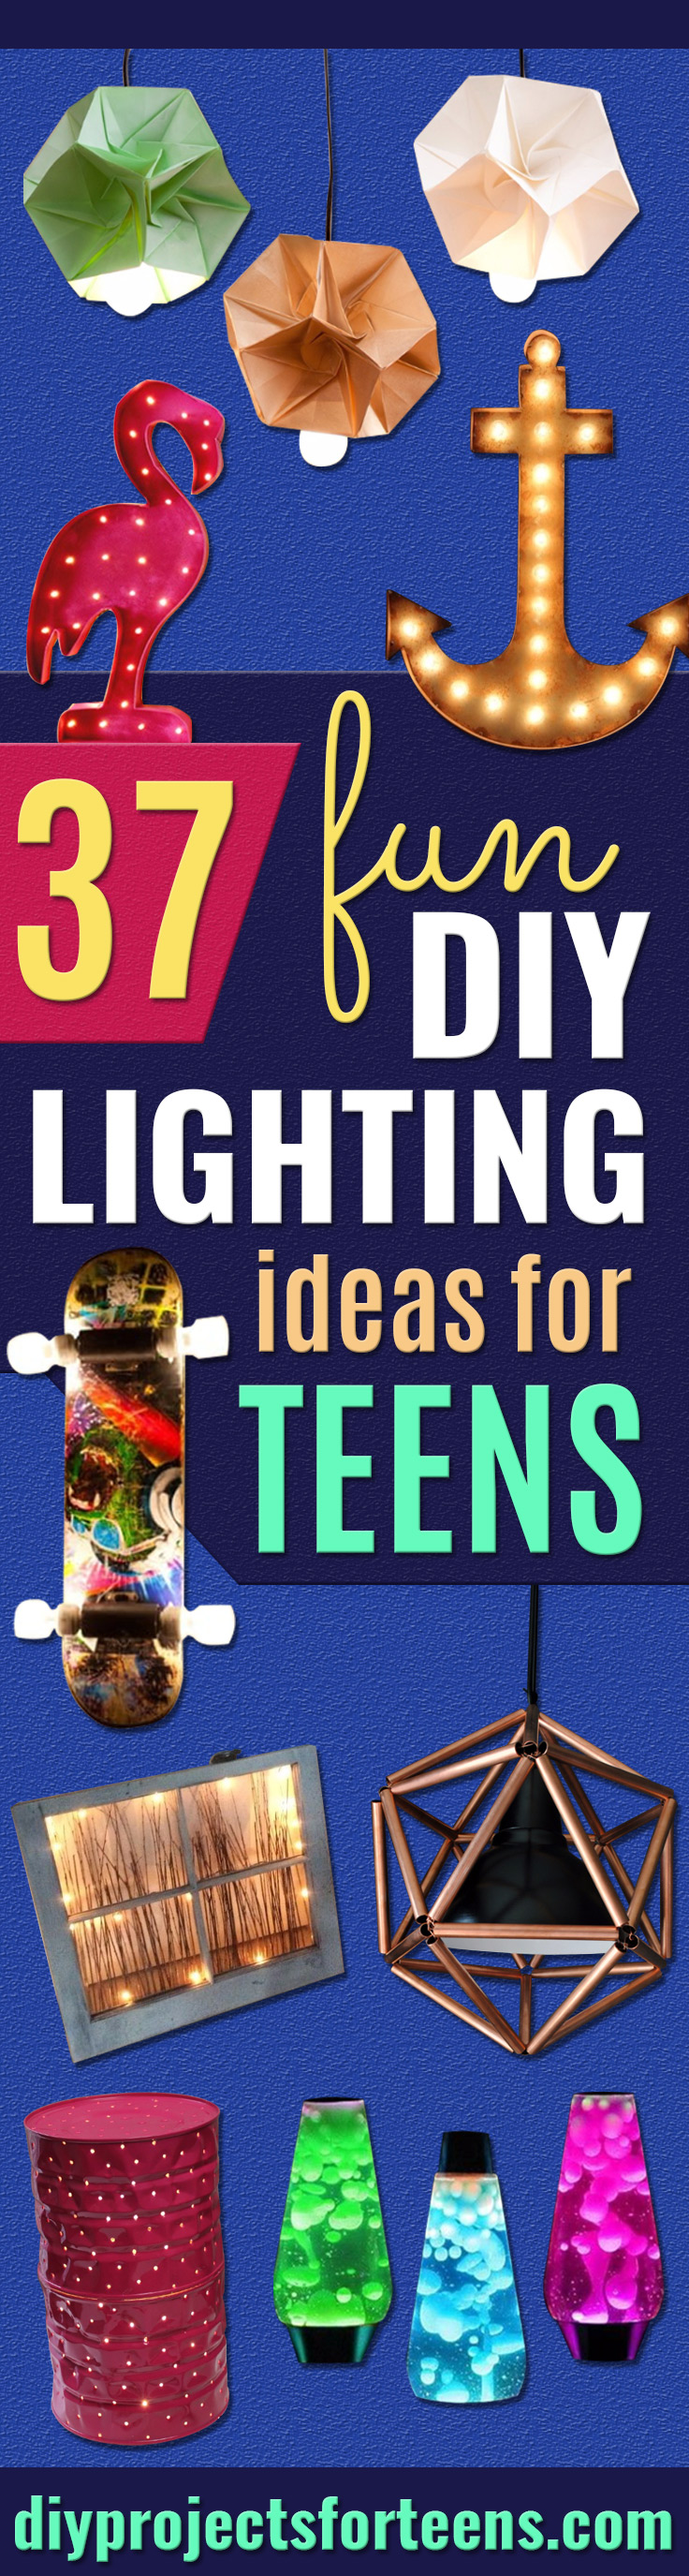 DIY Lighting Ideas for Teen and Kids Rooms - Fun DIY Lights like Lamps, Pendants, Chandeliers and Hanging Fixtures for the Bedroom plus cool ideas With String Lights. Perfect for Girls and Boys Rooms, Teenagers and Dorm Room Decor 